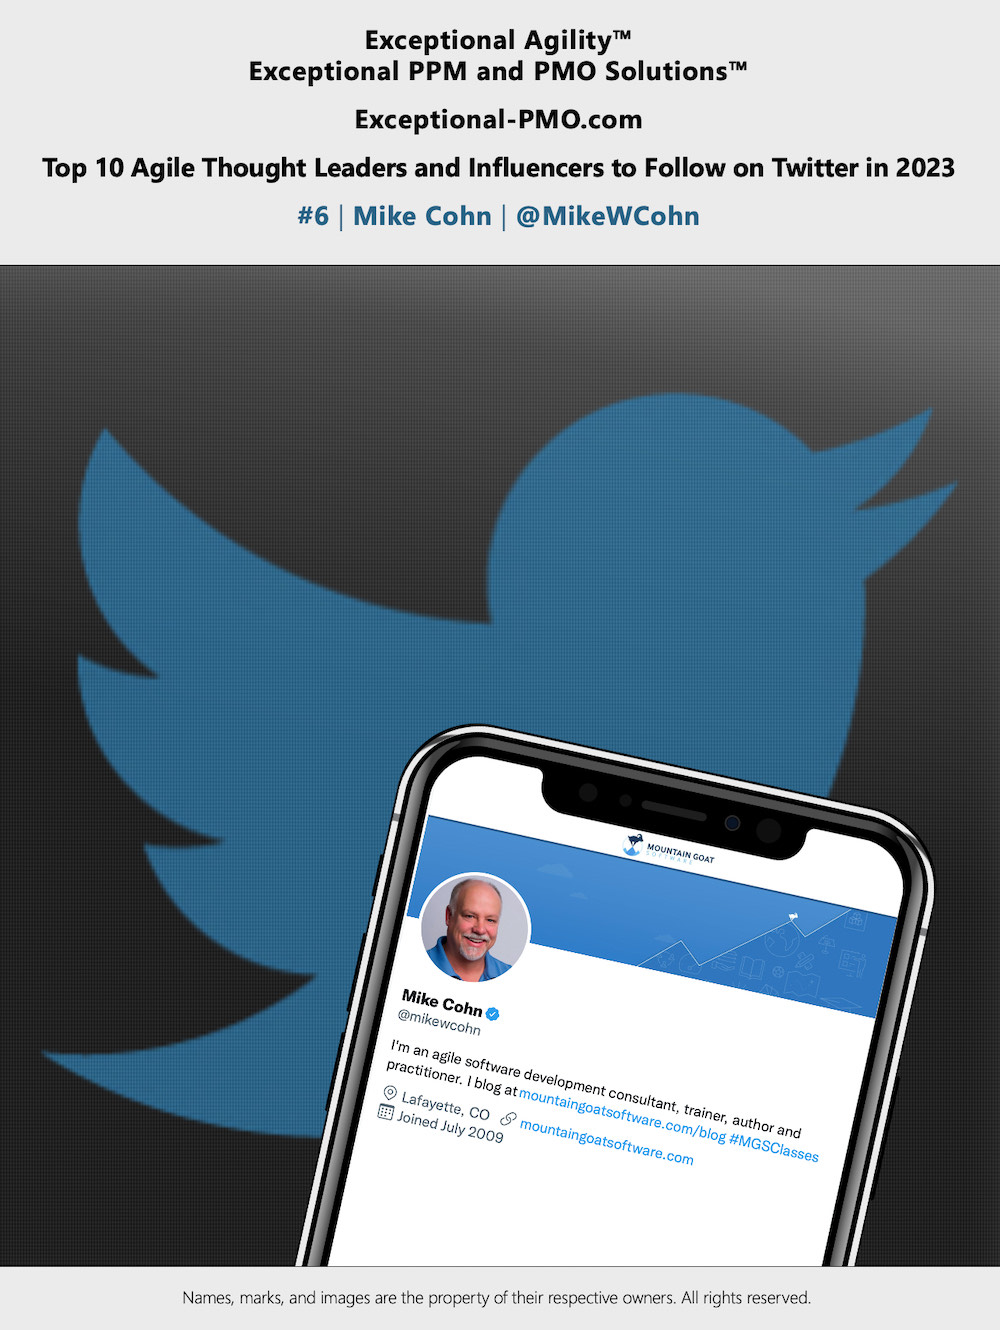 Exceptional-PMO_com - Top 10 Agile Thought Leaders and Influencers to Follow on Twitter in 2023 - 06 - lr - sq